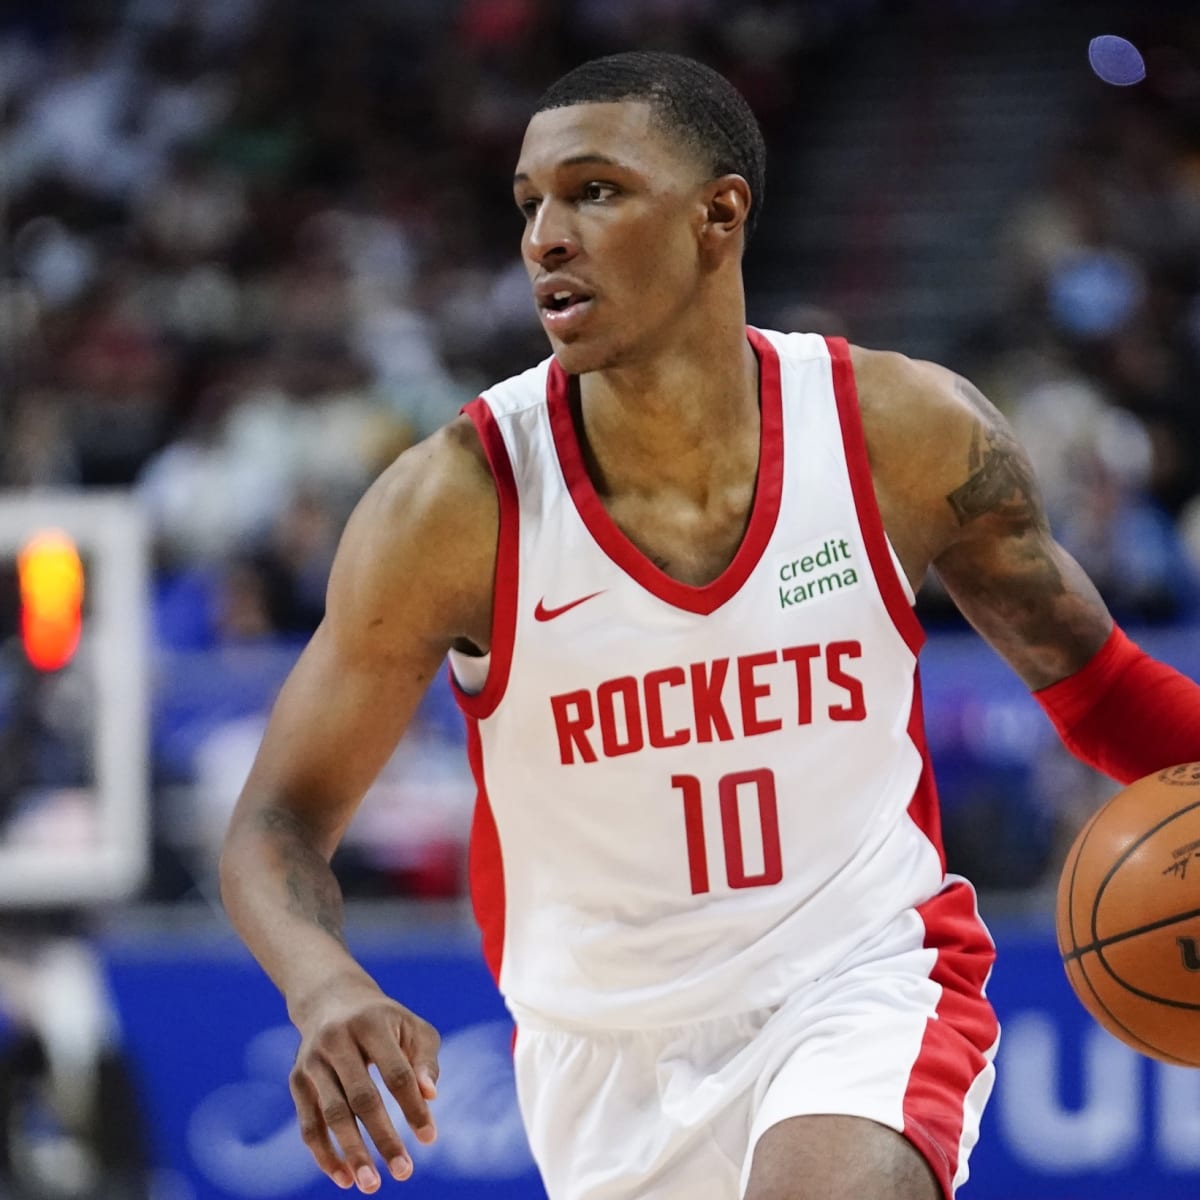 Rockets had many contributors to a successful Summer League - The